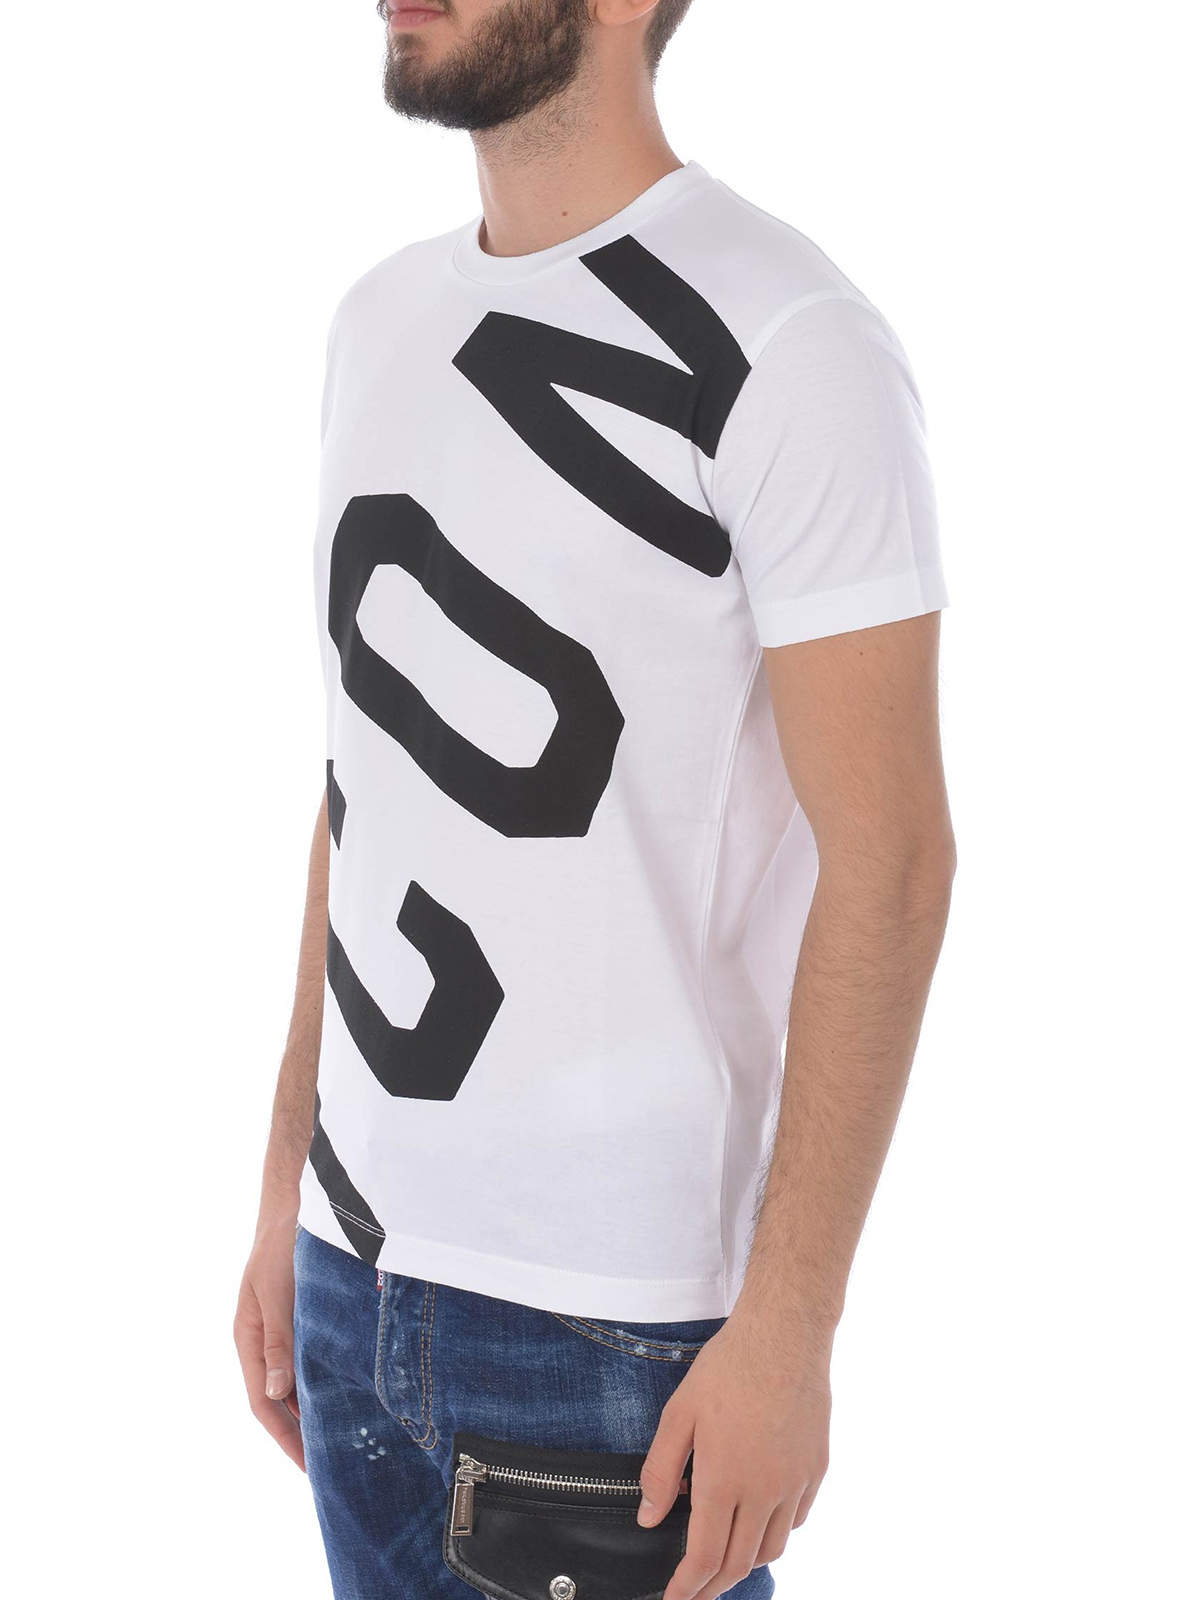 icon dsquared t shirt